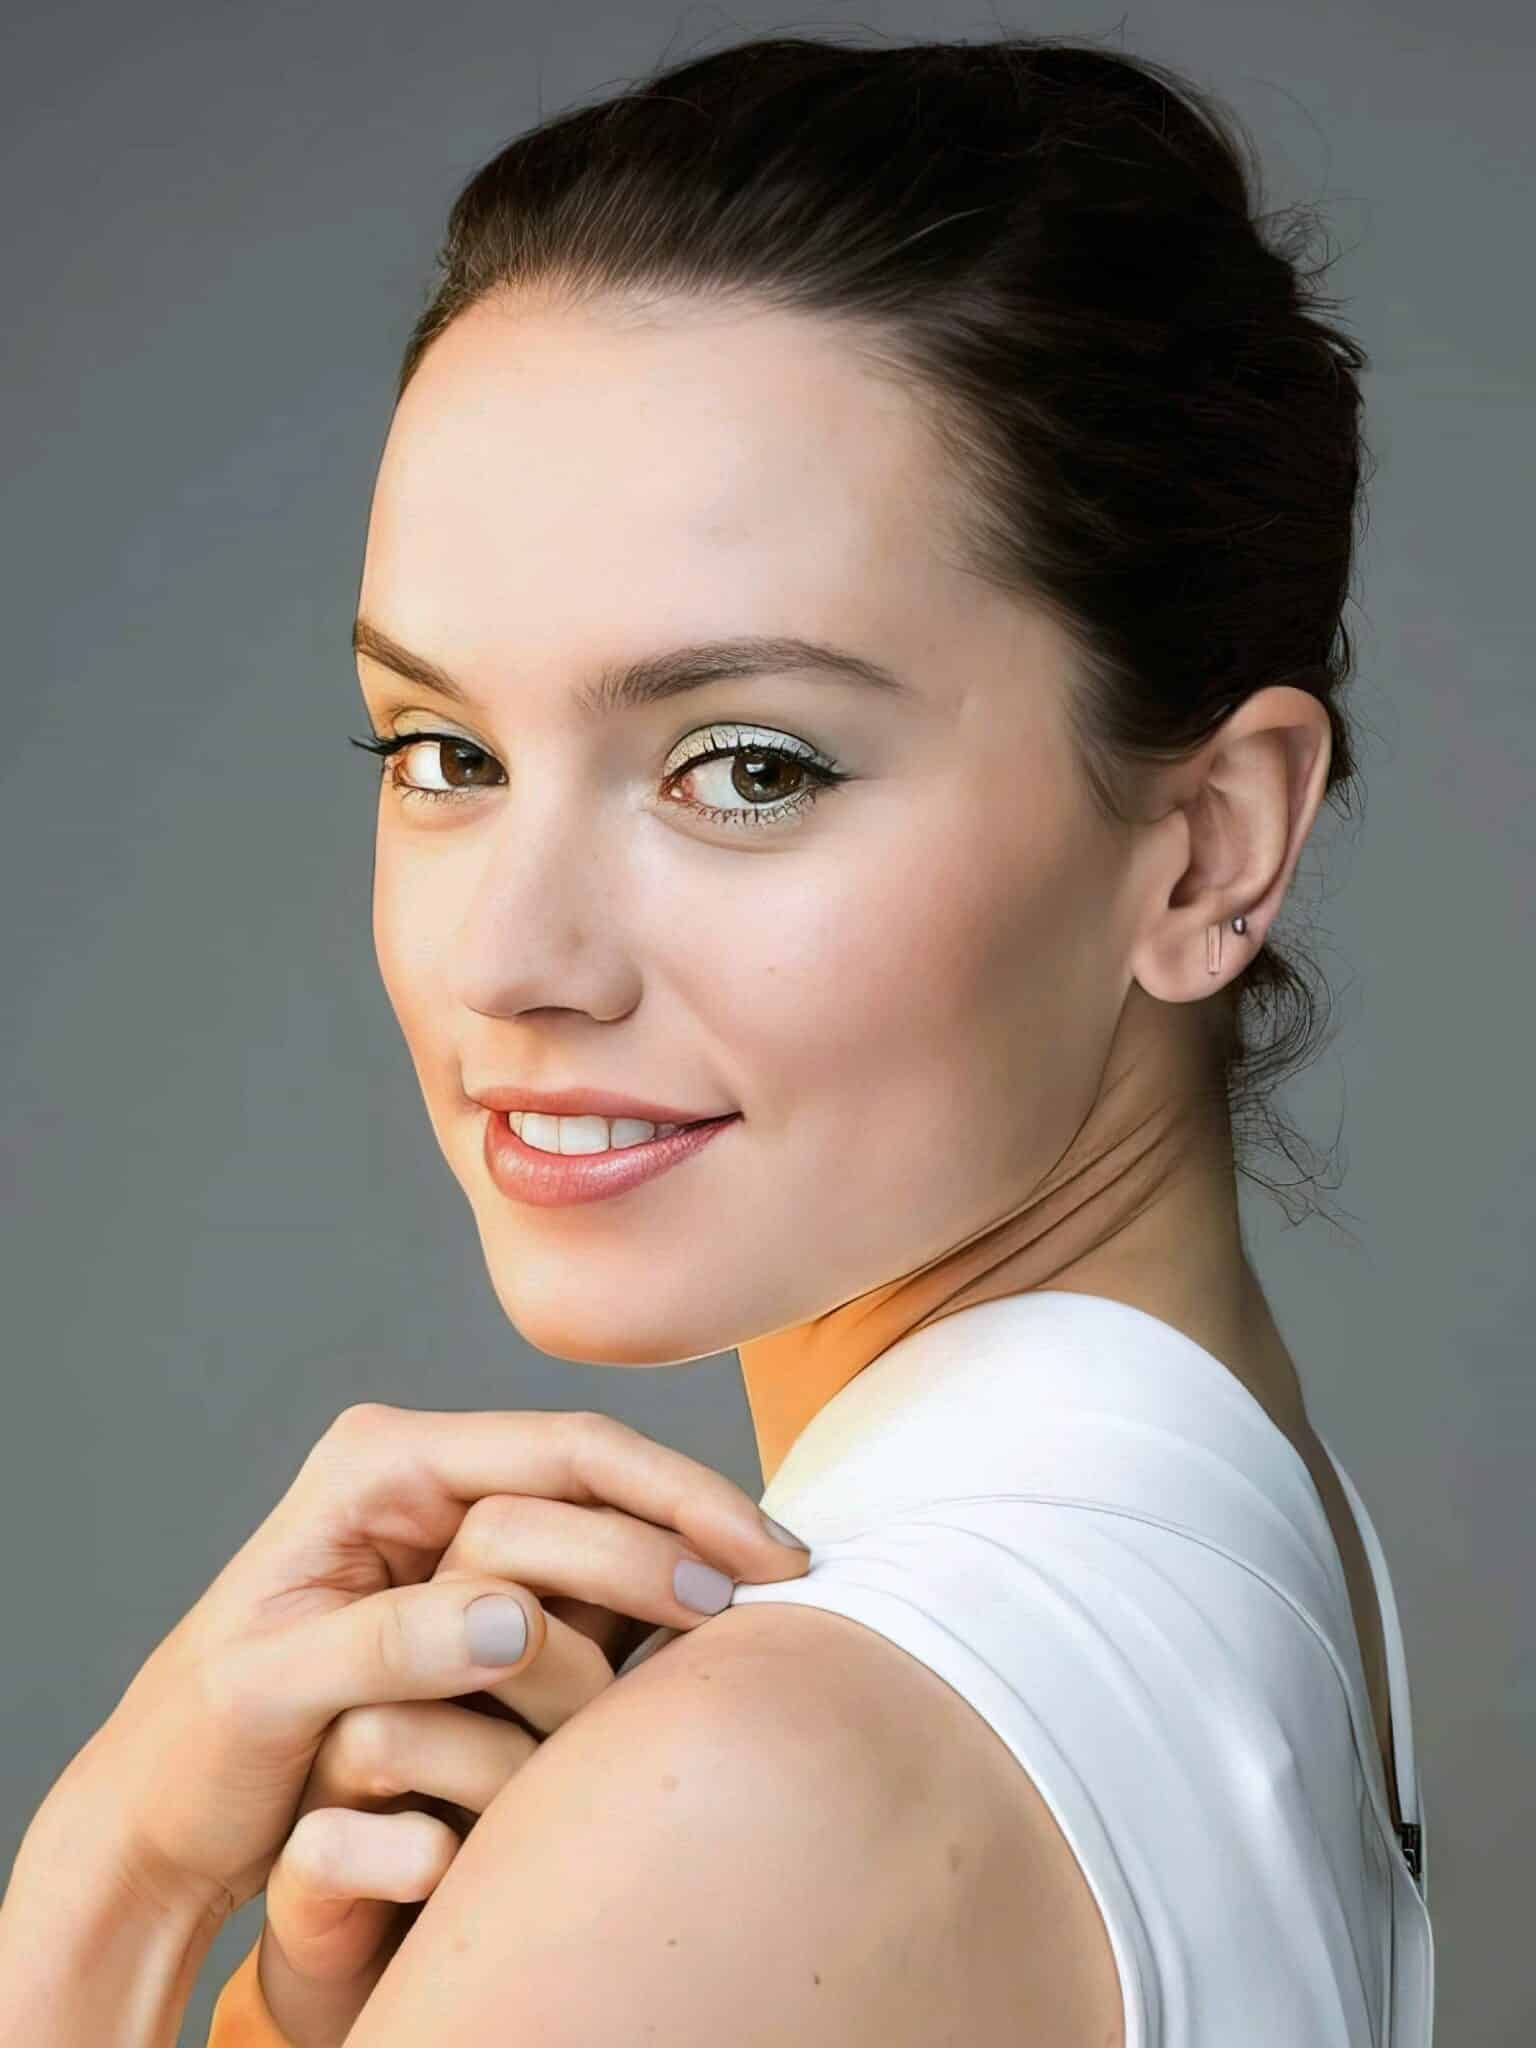 babu mohammed recommends daisy ridley deepfake pic